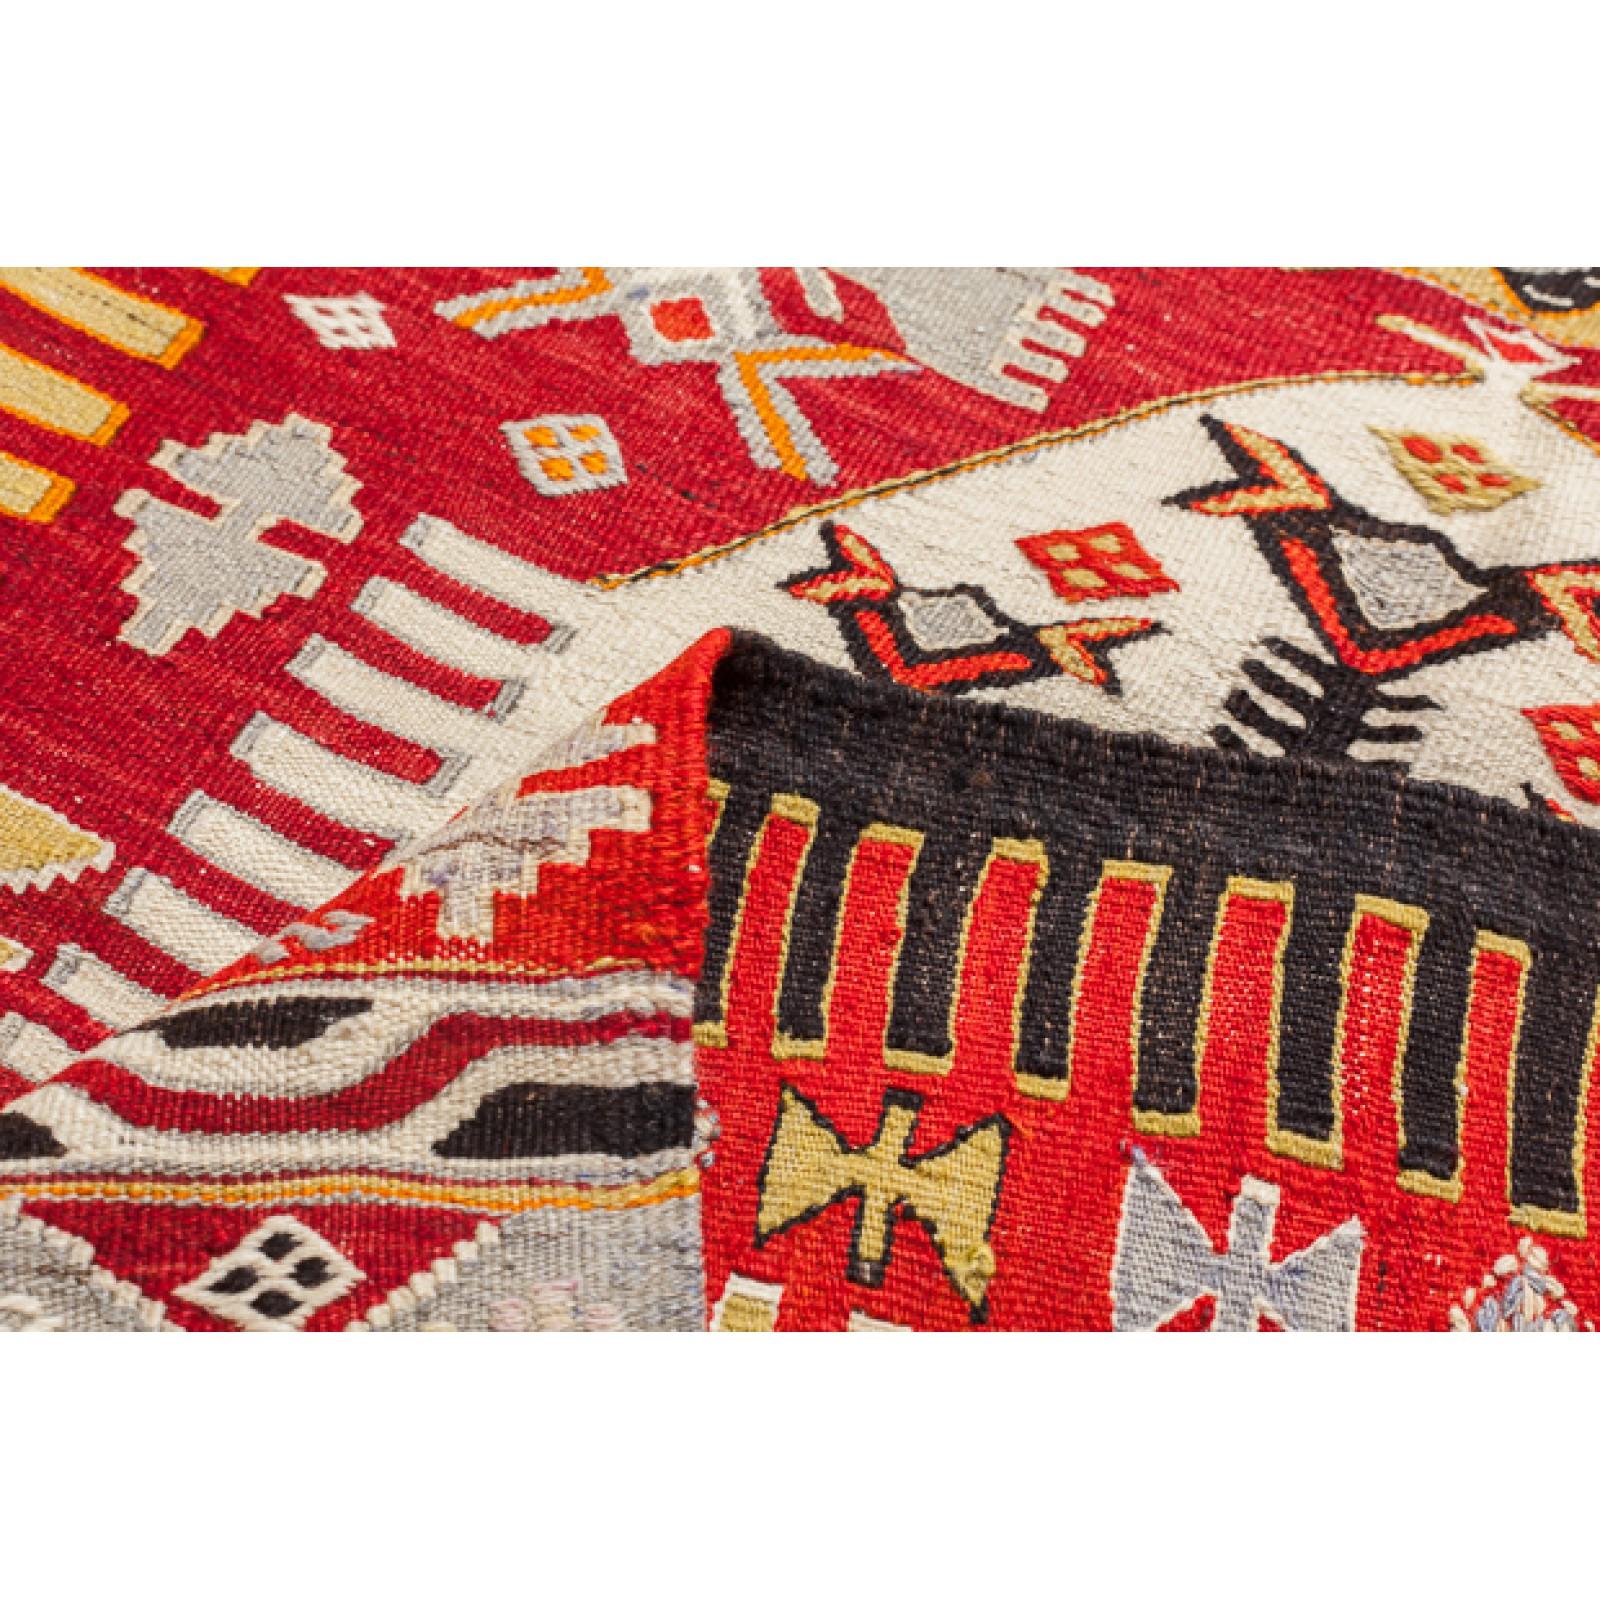 This is Western Anatolian Vintage Kilim from the Afyon region with a rare and beautiful color composition. 

This highly collectible antique kilim has a wonderful special color and texture that is typical of an old kilim in good condition. It is a